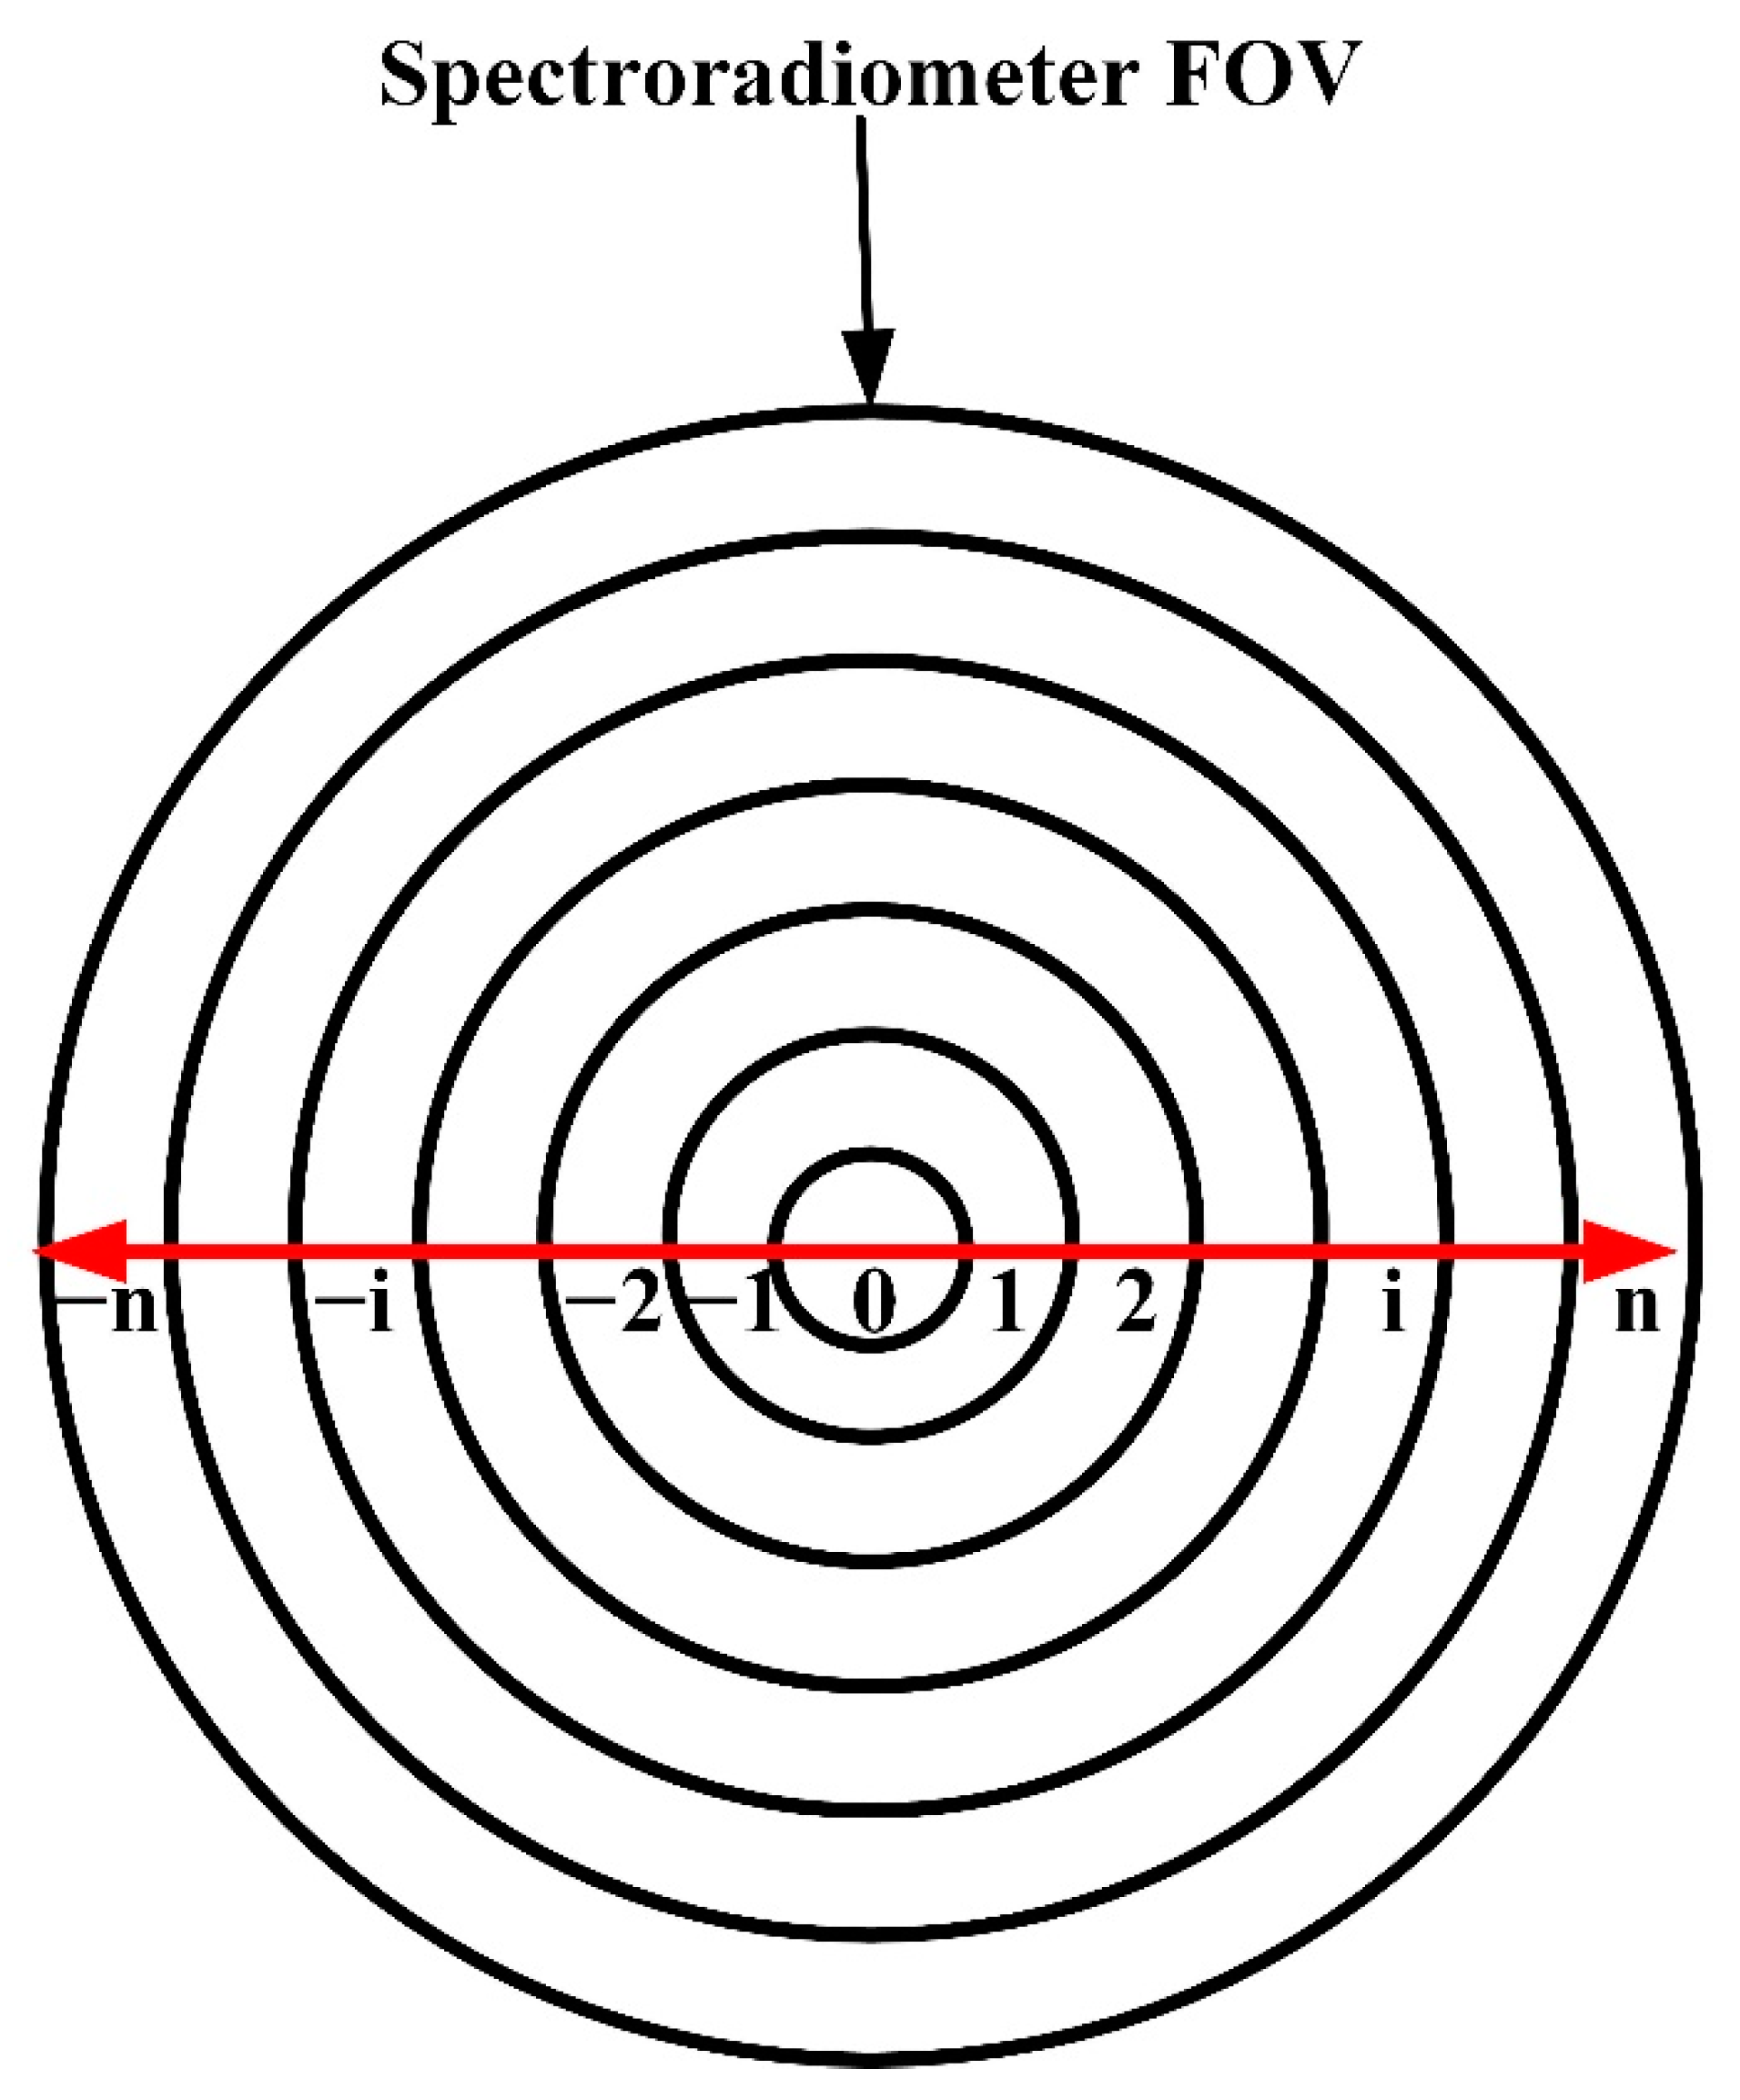 Draw concentric circle for the following measurements of radii